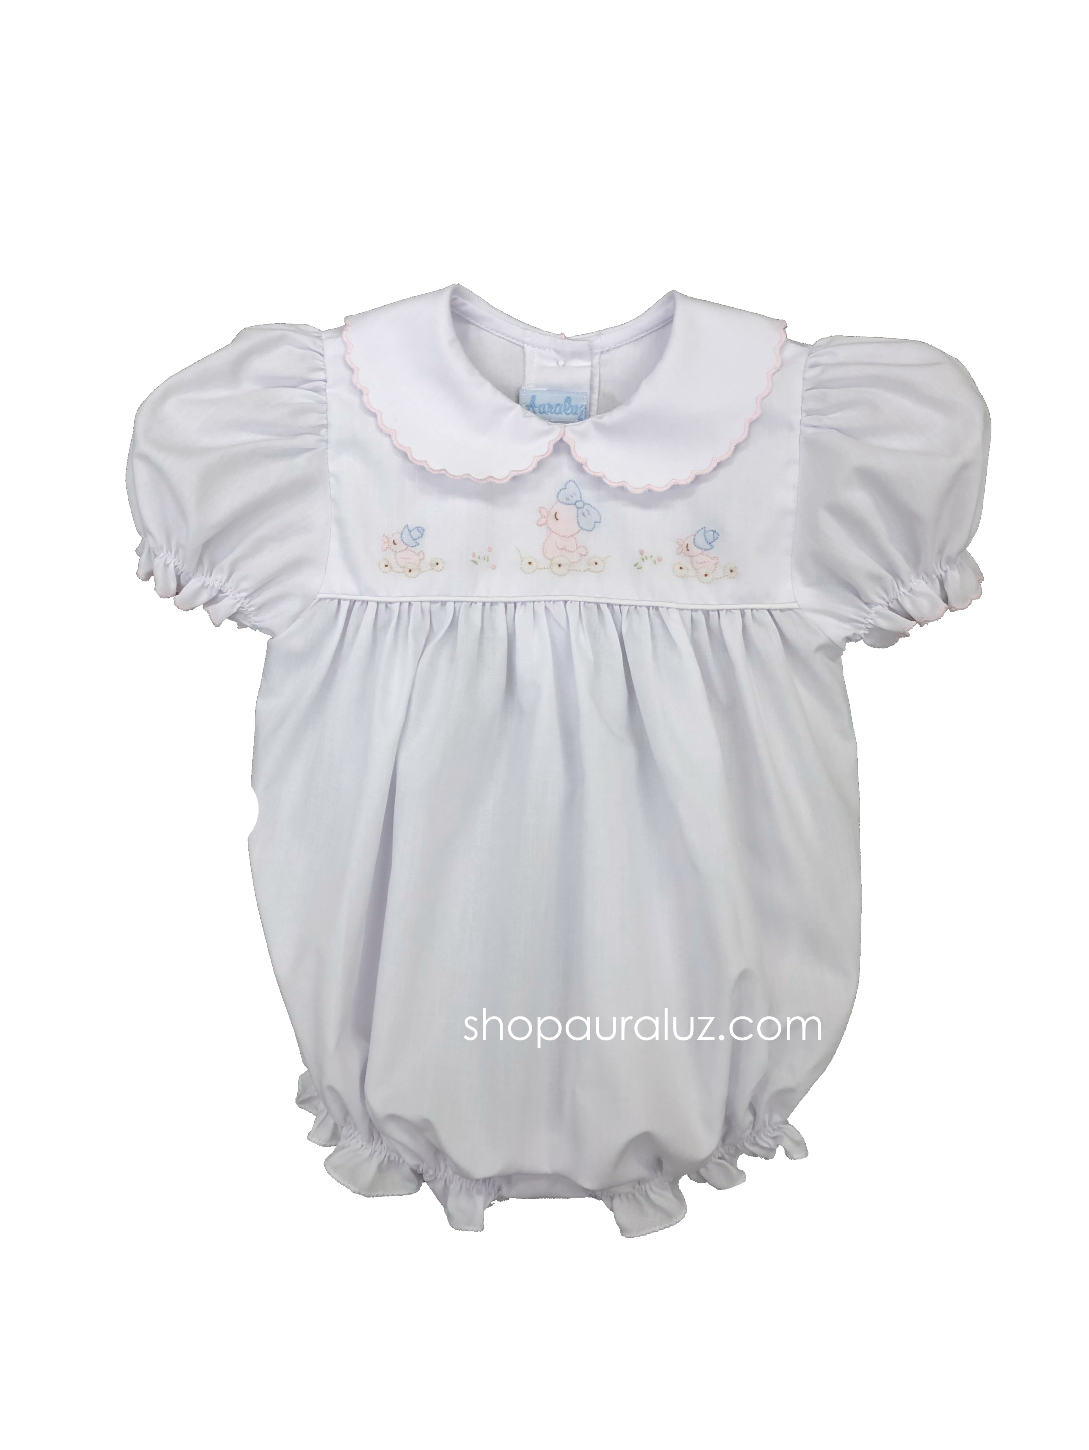 Auraluz Girl Bubble...White with pink scallop trim and embroidered ducks